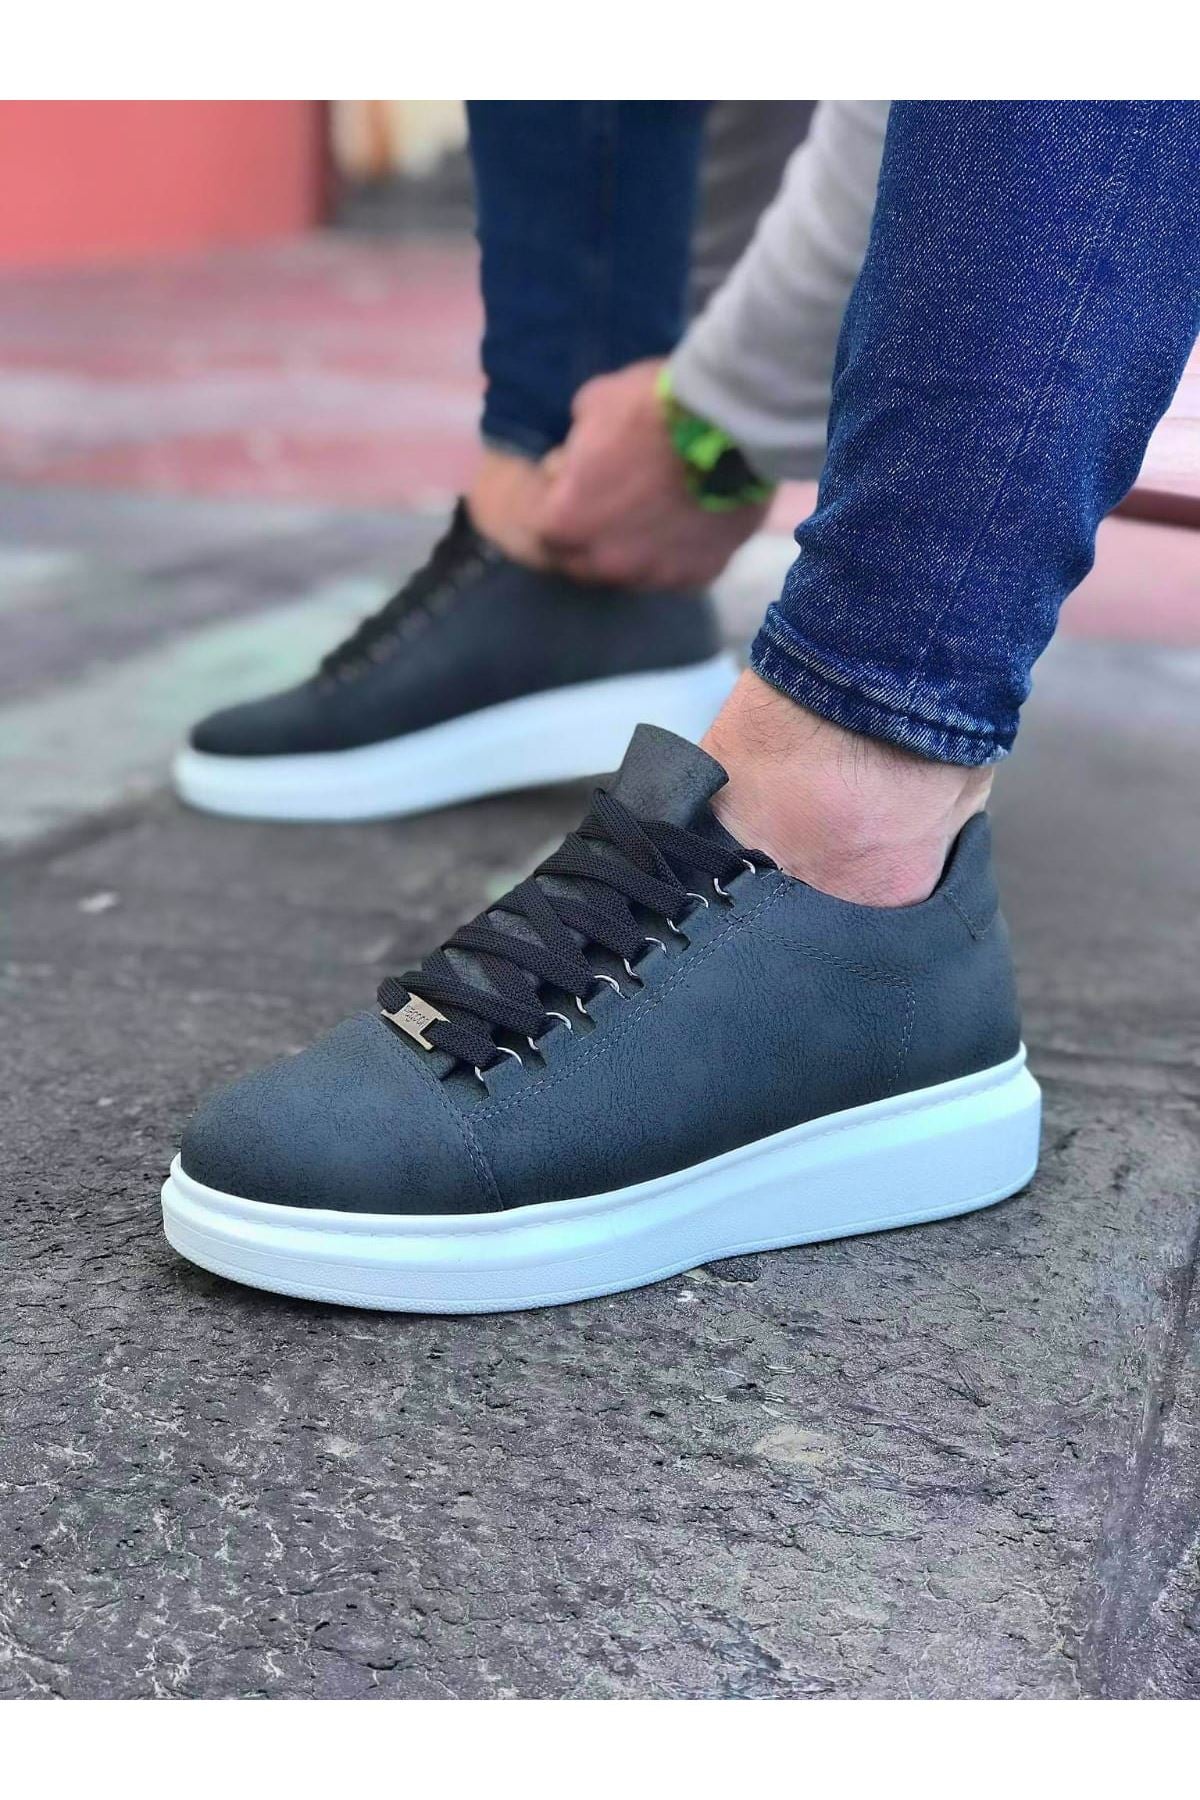 WG08 Gray Flat Men's Casual Shoes - STREETMODE ™